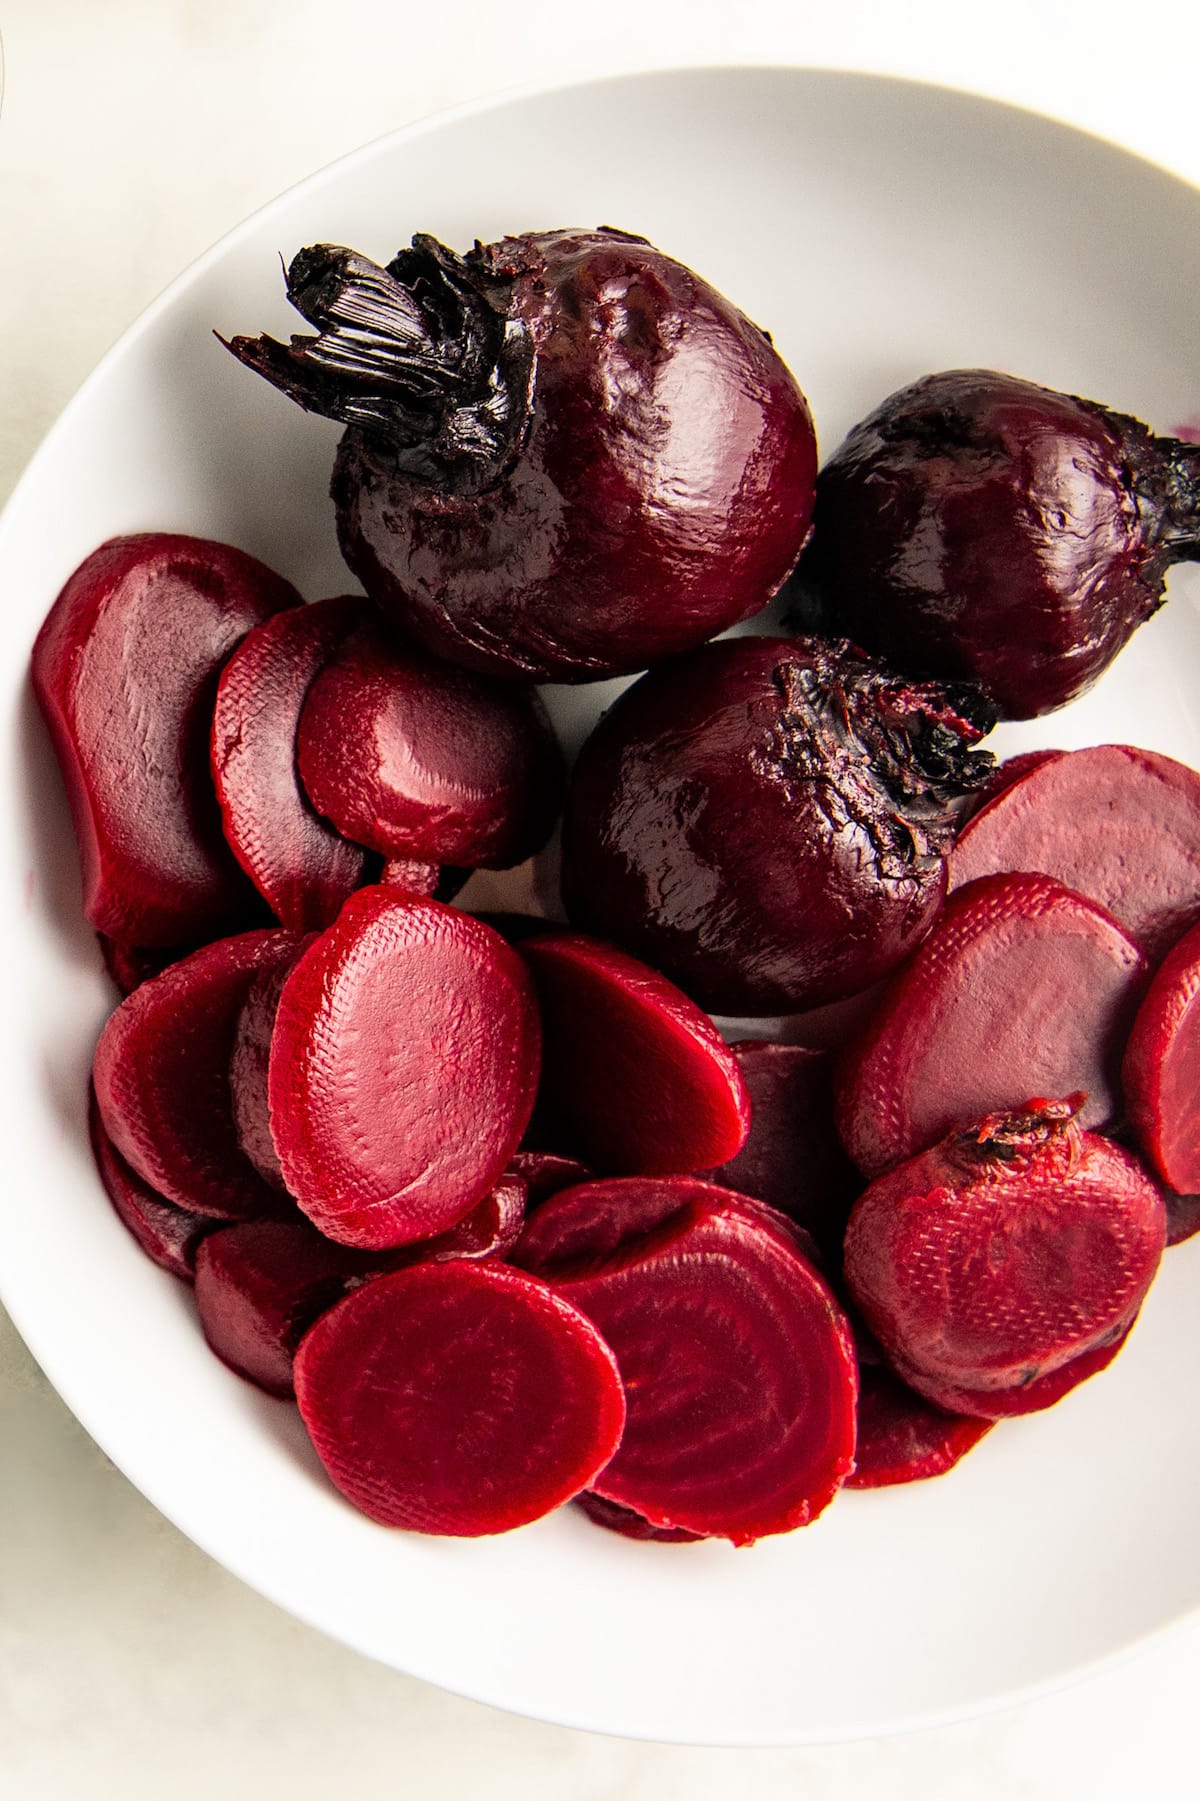 Whole and sliced beets on a white plate.